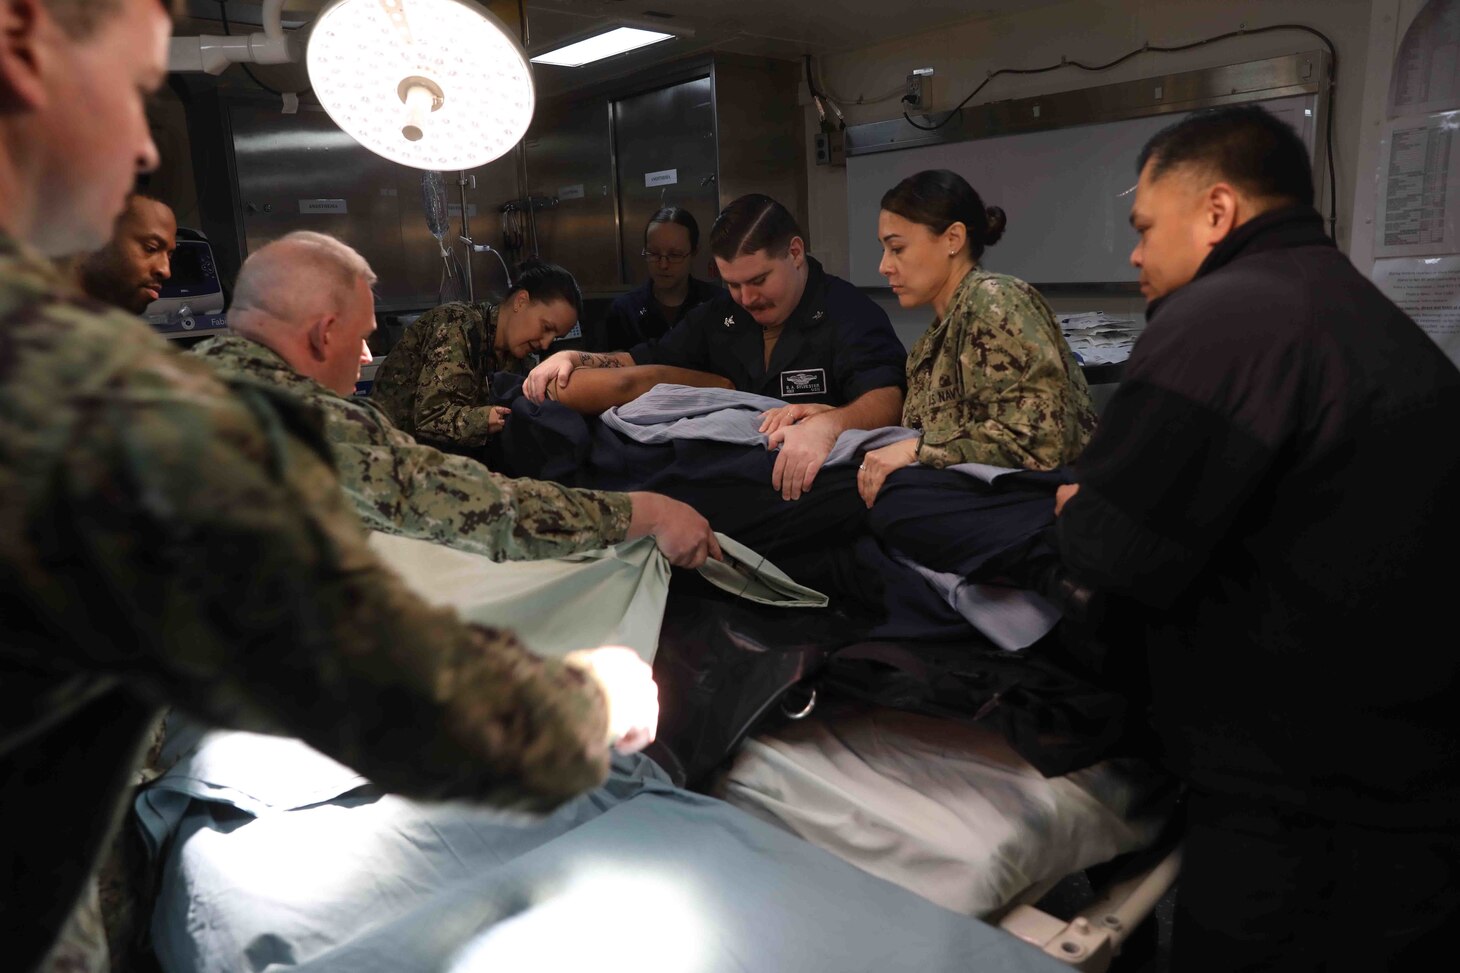 NORFOLK, Va. (Feb. 16, 2023) Wasp-class amphibious assault ship USS Bataan (LHD 5) Medical Department Sailors transfer a simulated casualty into a hospital bed as part of a pier-side trauma training exercise, Feb. 16, 2023. The medical exercise was conducted as part of a Naval Medical Forces Atlantic and U.S. Fleet Forces Command-driven effort to align with and support fleet and joint requirements, and to improve deployment readiness of organic fleet medical departments. During the evolution, the ship’s medical staff participated in several medical scenarios and received real-time feedback in order to build enhanced knowledge and skillsets. (U.S. Navy photo by Mass Communication Specialist 2nd Class Darren Newell)